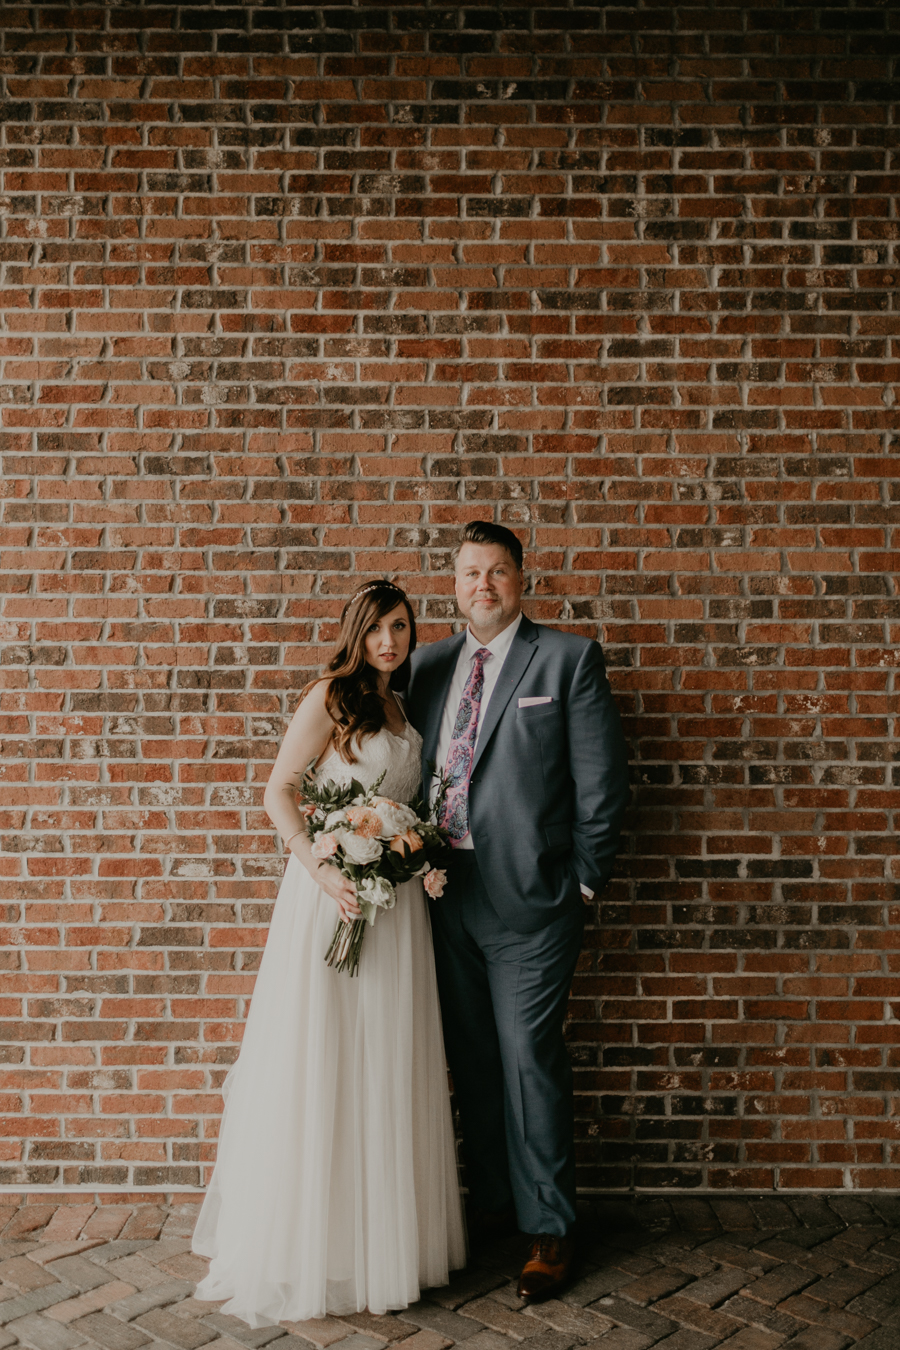 Stephanie And Kent Bailey Tampa Florida Romantic Wedding At Coppertail Brewery in Ybor Florist Fire BHLDN Mis En Place Ibex String Quartet Let Them Eat Cake -79.jpg